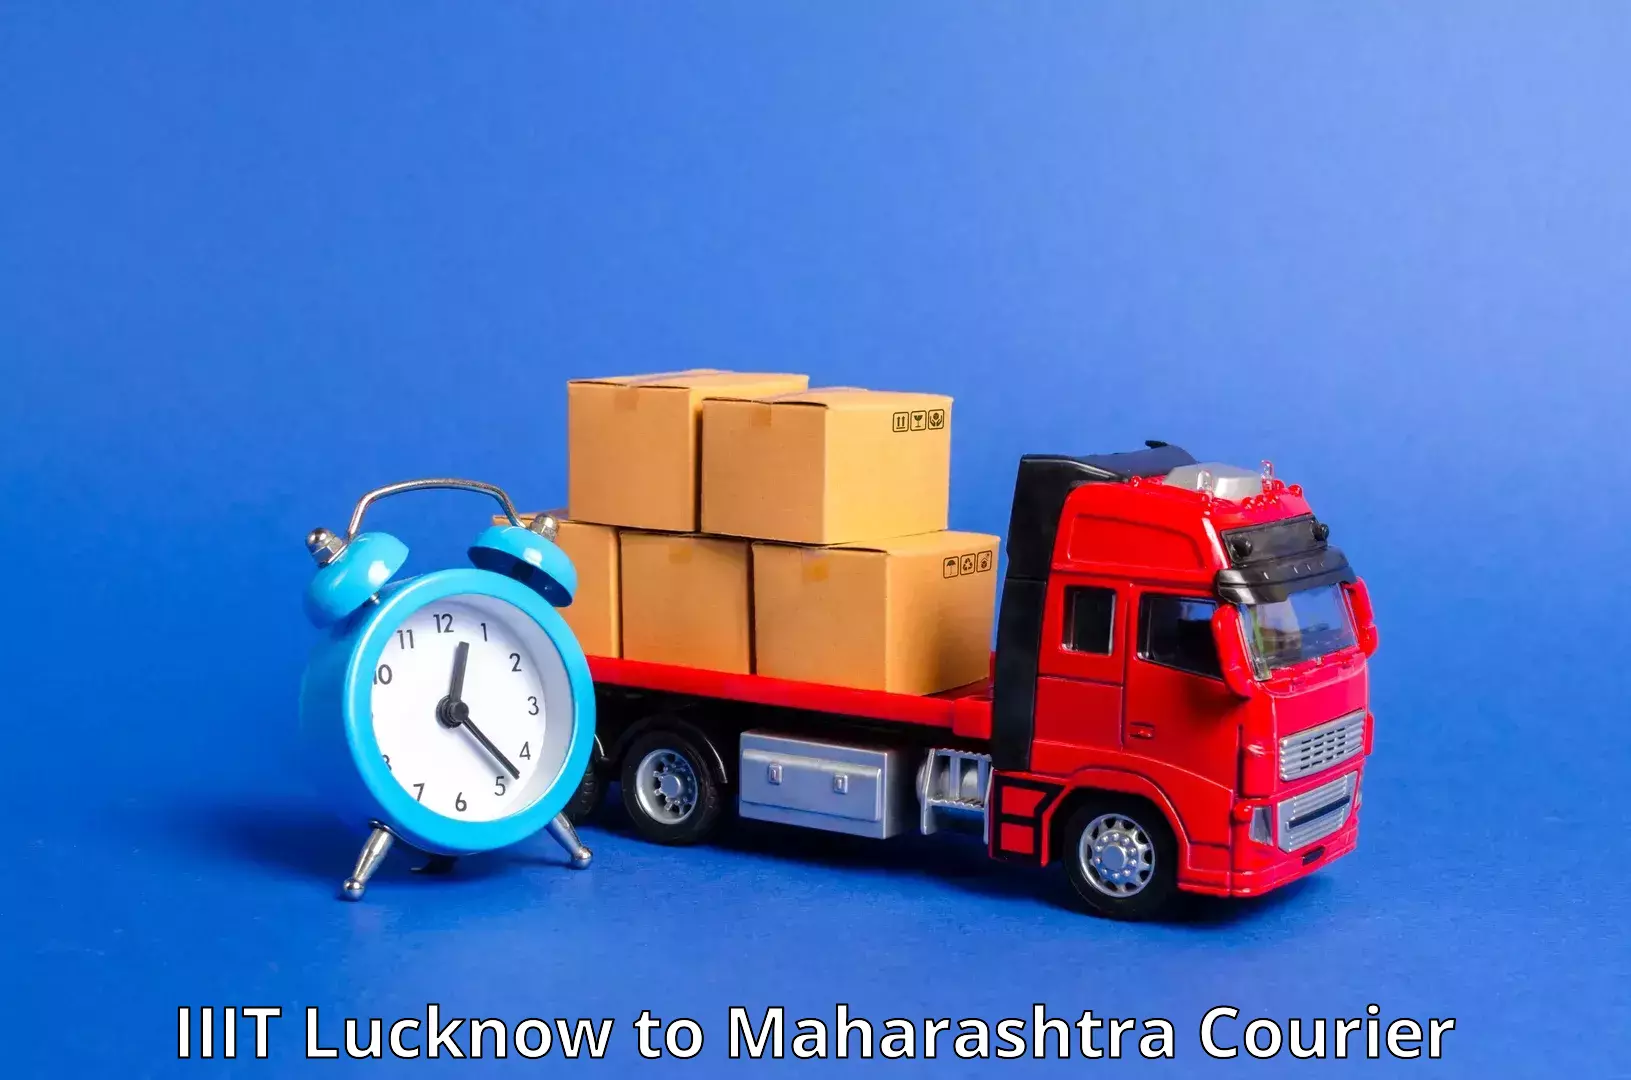 Professional parcel services IIIT Lucknow to Pimpri Chinchwad